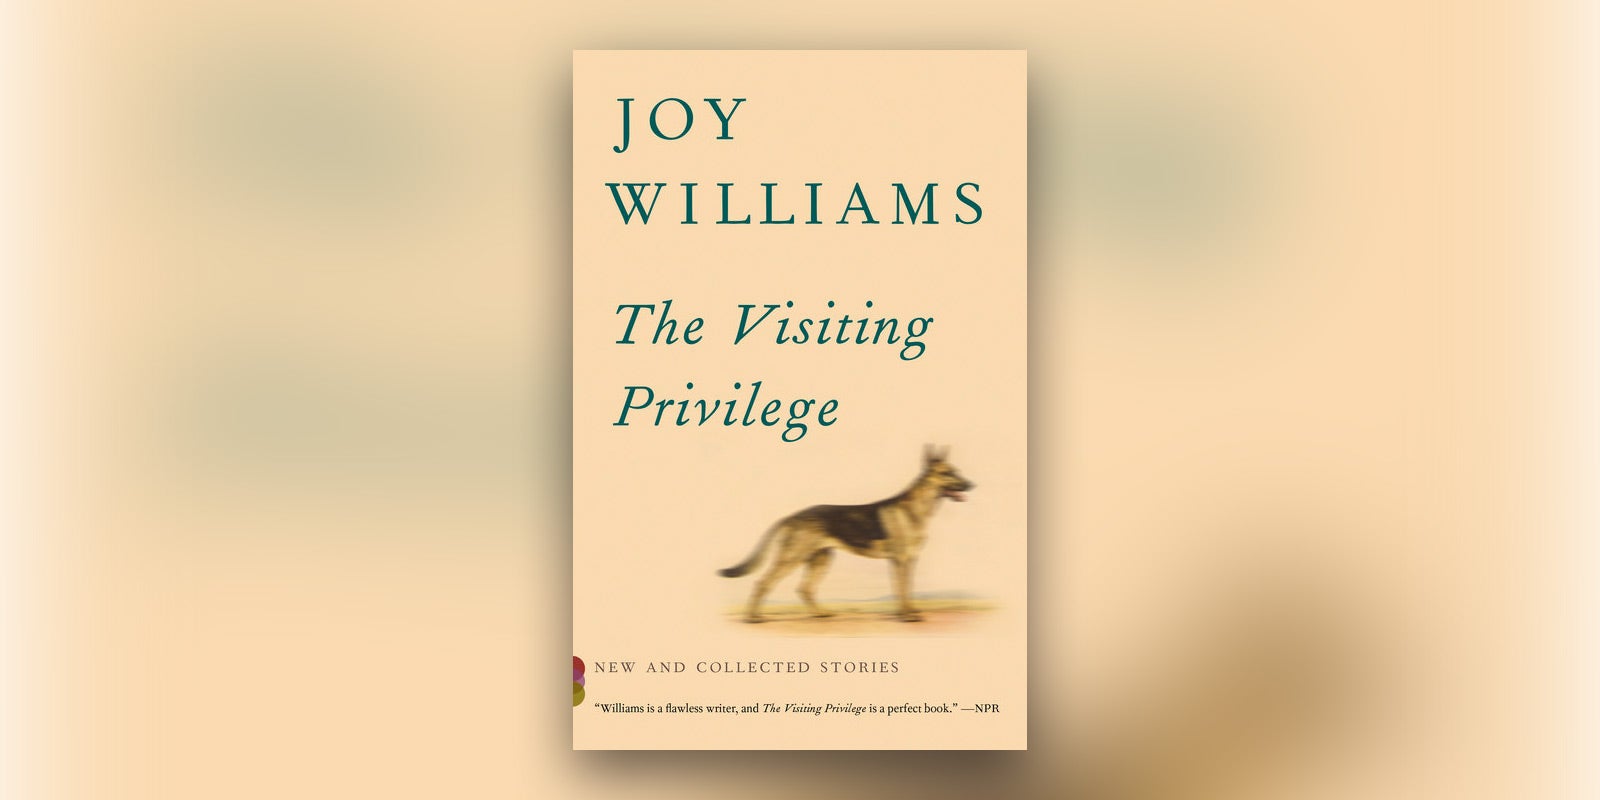 Joy Williams has been named the 2016 PEN/Malamud Award for Short Fiction honoree